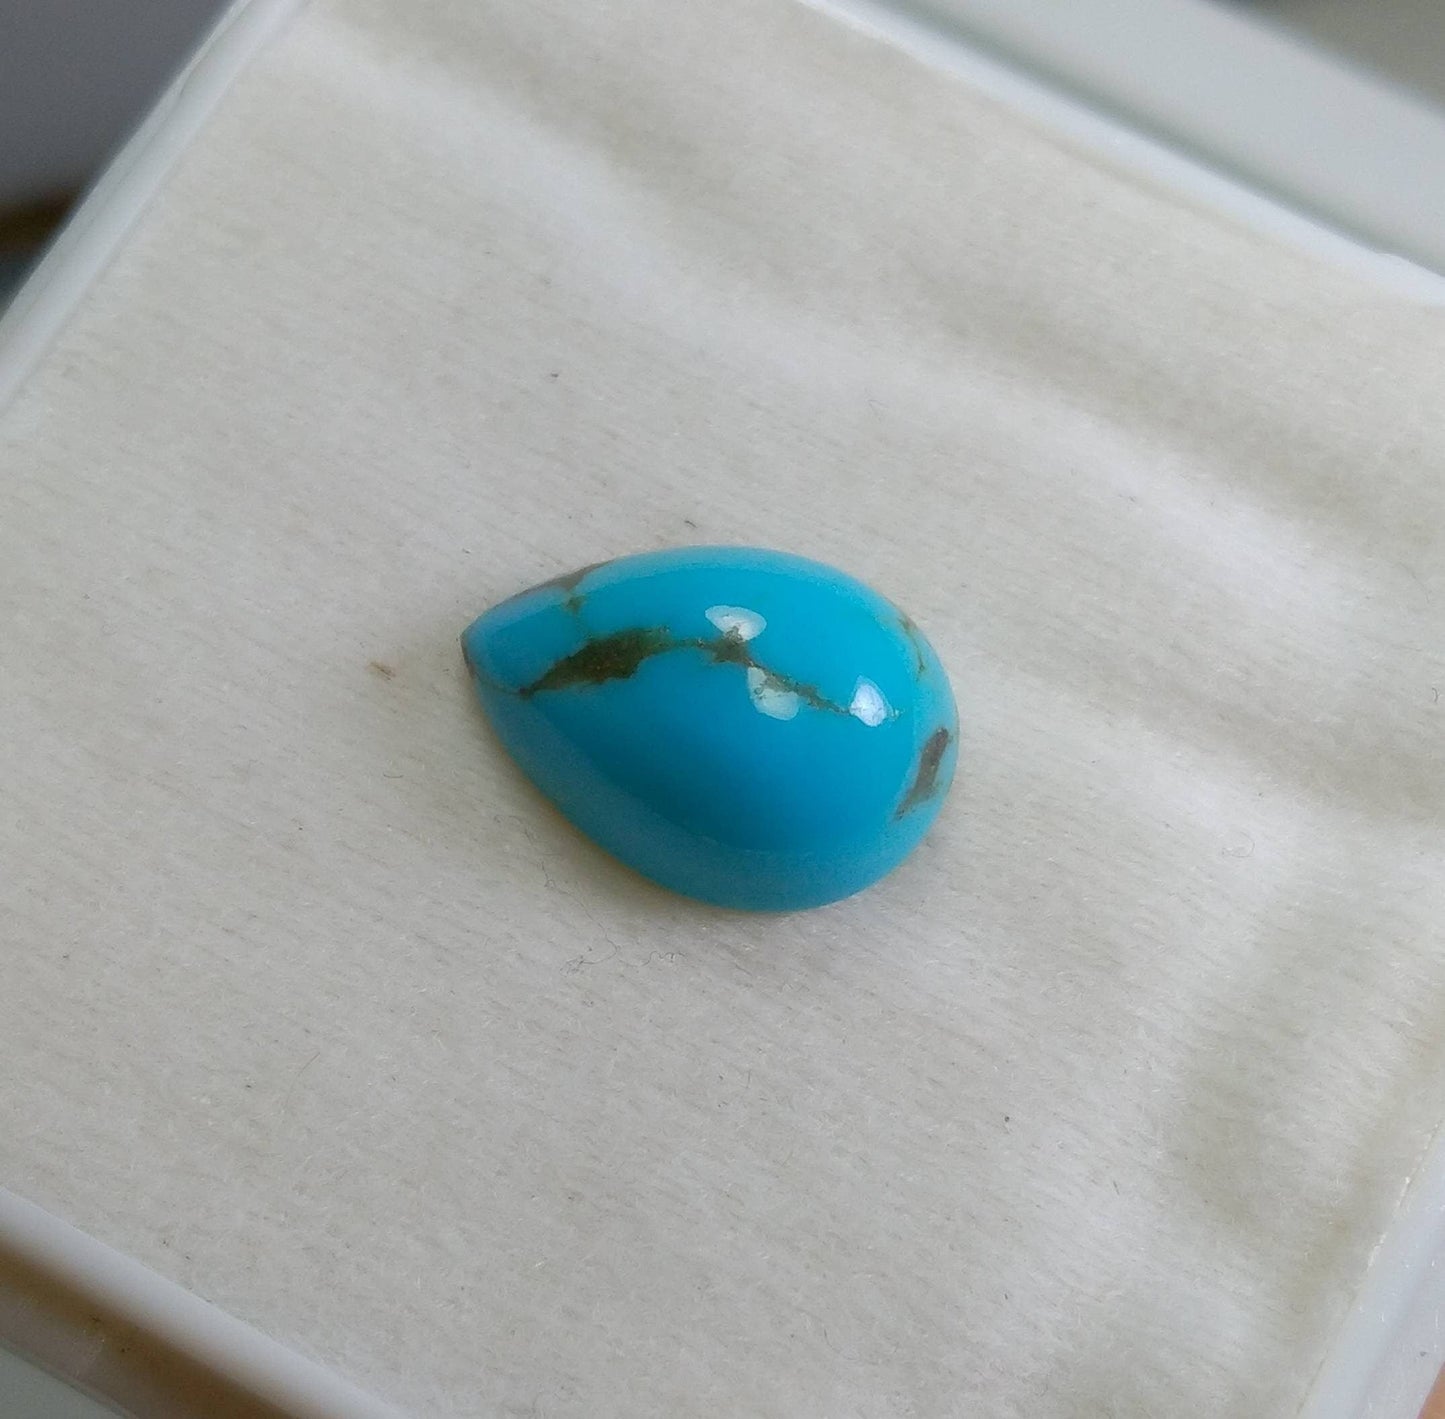 ARSAA GEMS AND MINERALSNatural aesthetic fine quality 9.5 carats pear shape kingman turquoise cabochon - Premium  from ARSAA GEMS AND MINERALS - Just $15.00! Shop now at ARSAA GEMS AND MINERALS